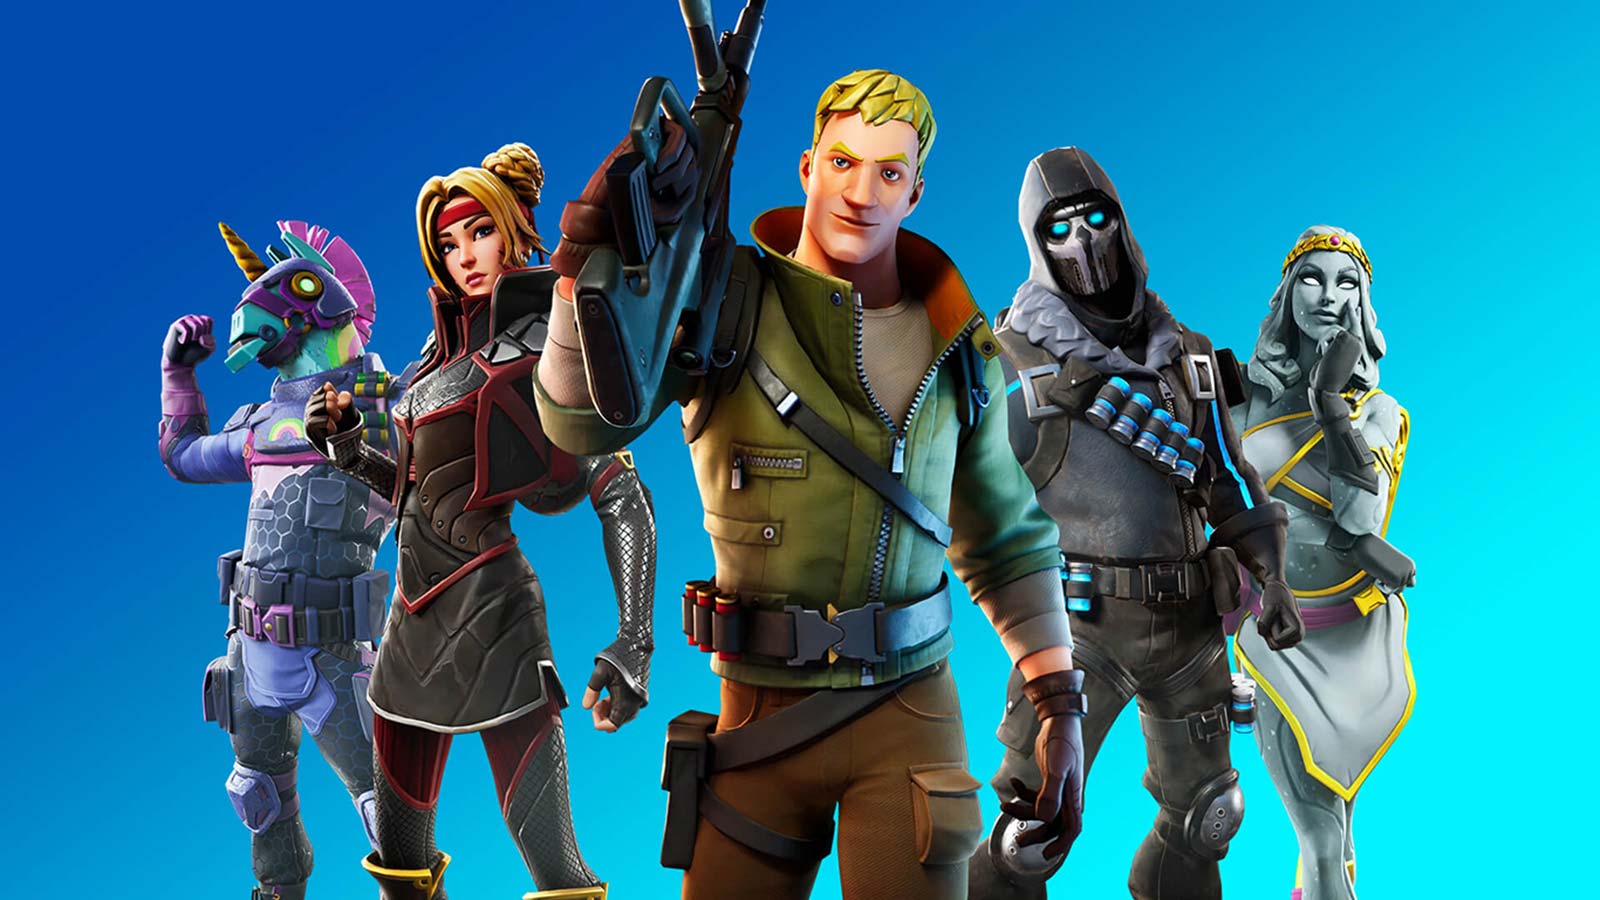 Fortnite continues to top the video game charts, so it's no surprise plenty of Twitch streamers are still entertaining viewers with the game.